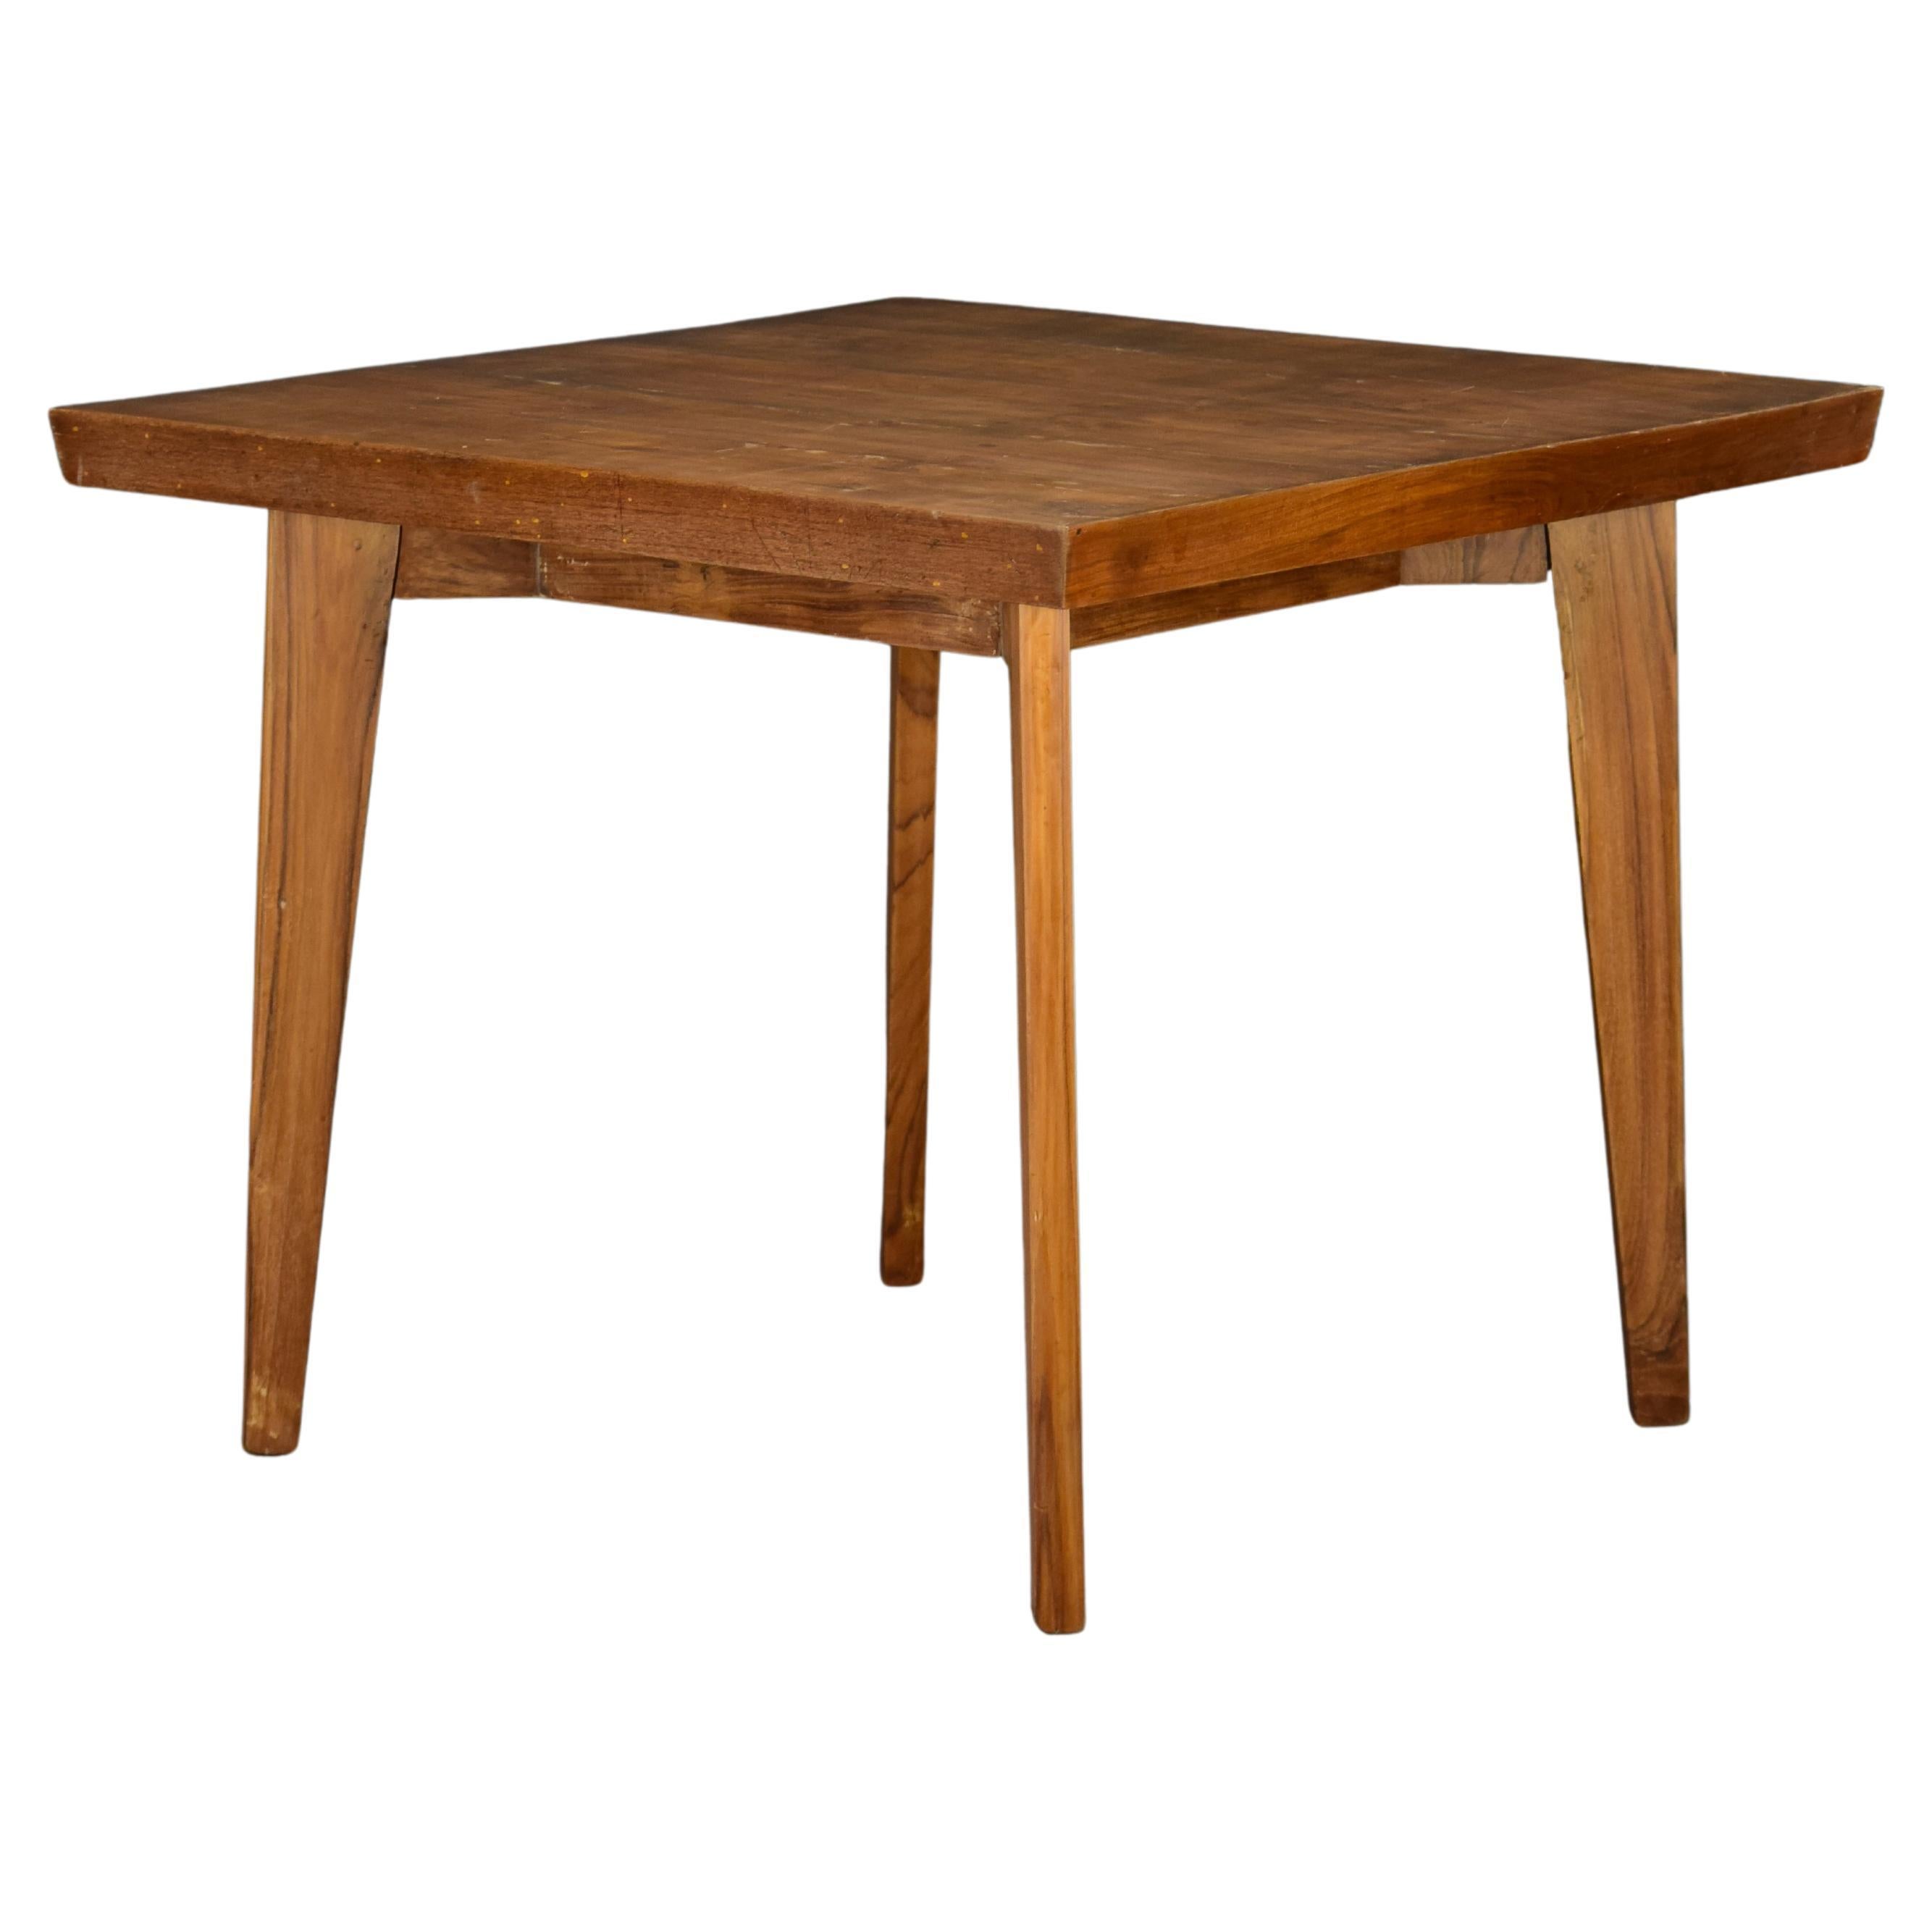 Pierre Jeanneret PJ-TA-05-A Dining Table / Authentic Mid-Century Modern